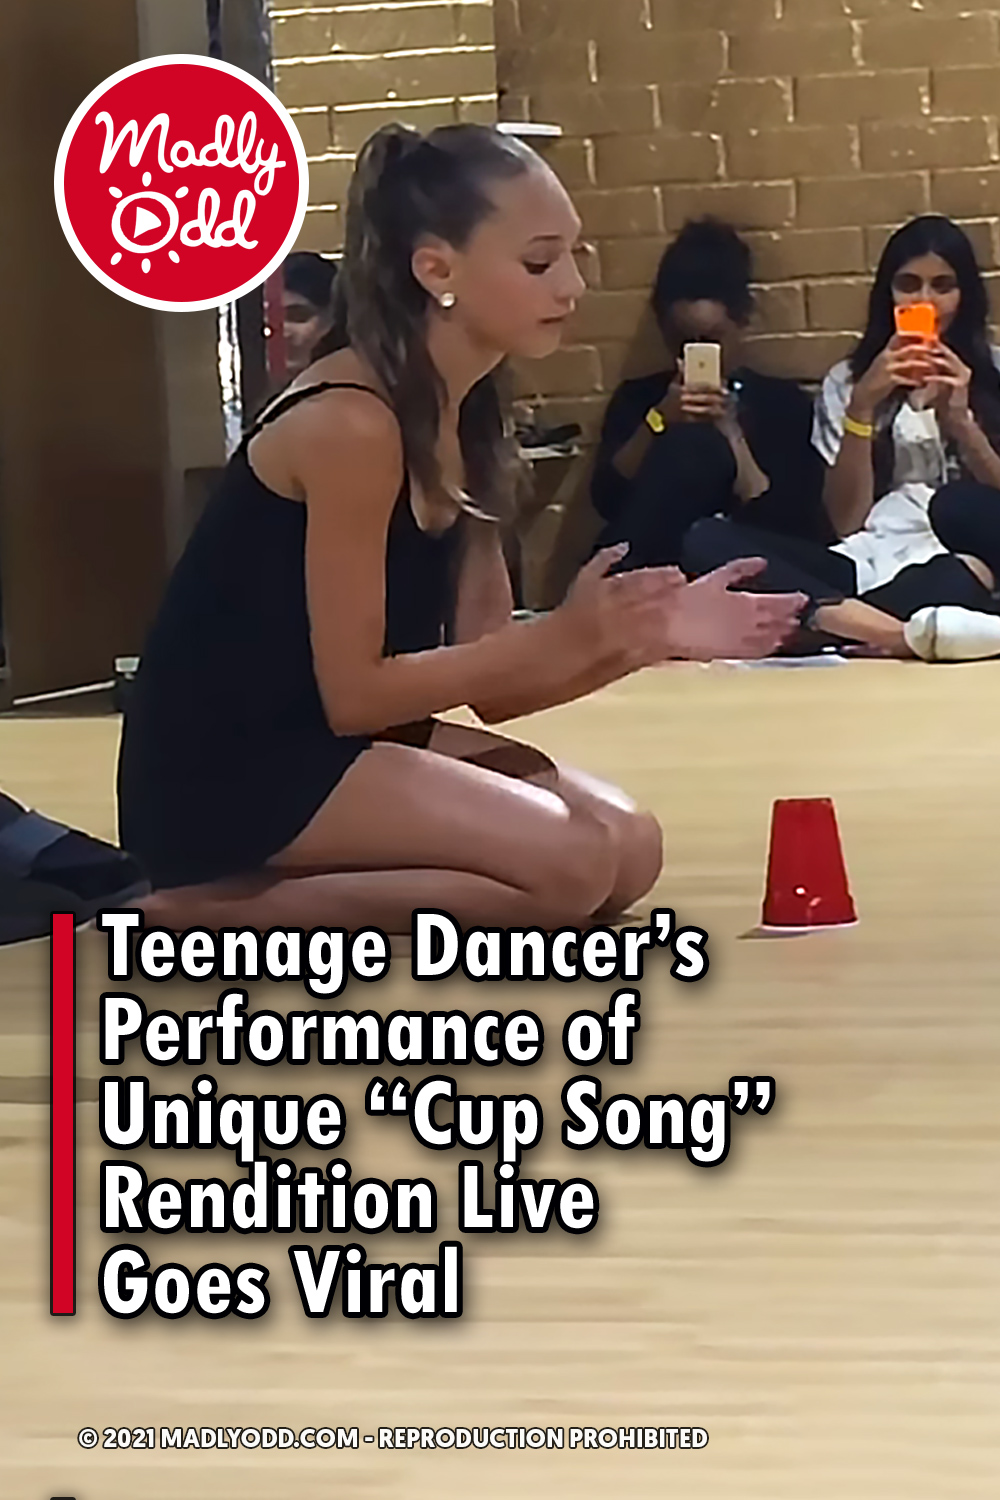 Teenage Dancer’s Performance of Unique “Cup Song” Rendition Live Goes Viral